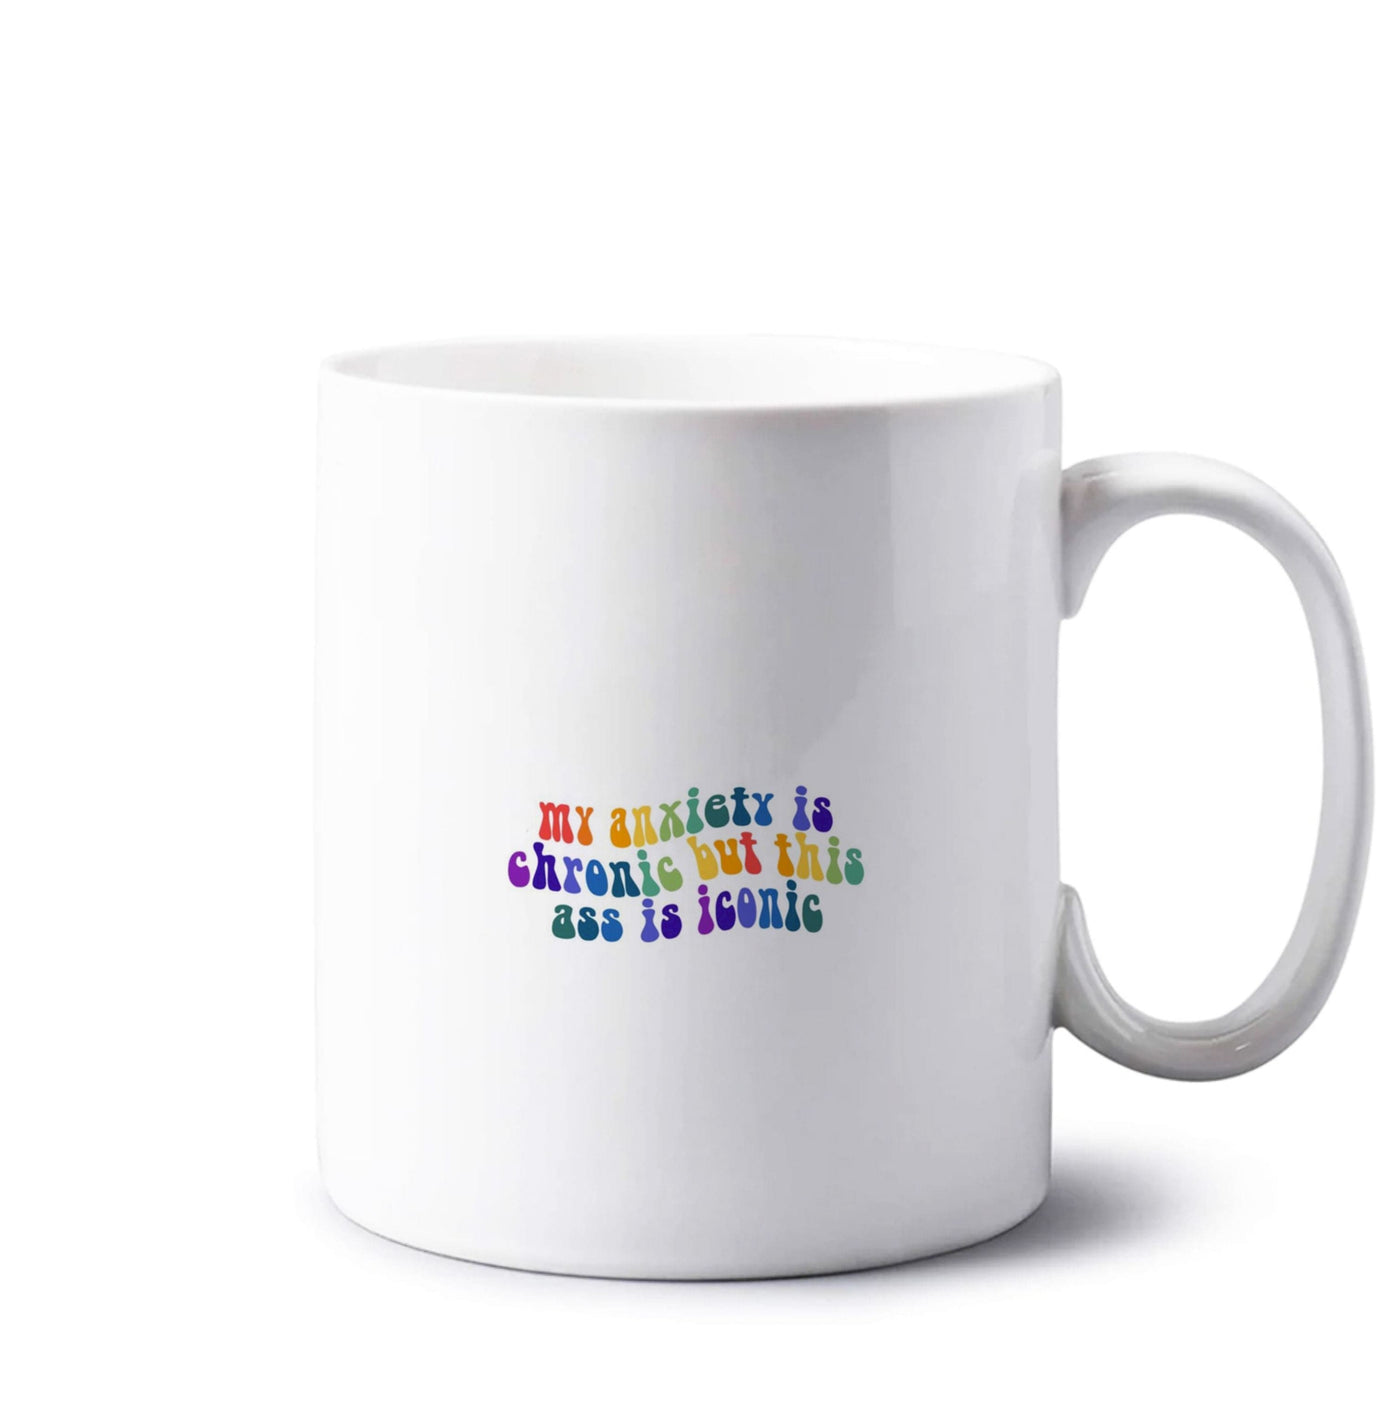 My Anxiety Is Chronic But This Ass Is Iconic - TikTok Mug